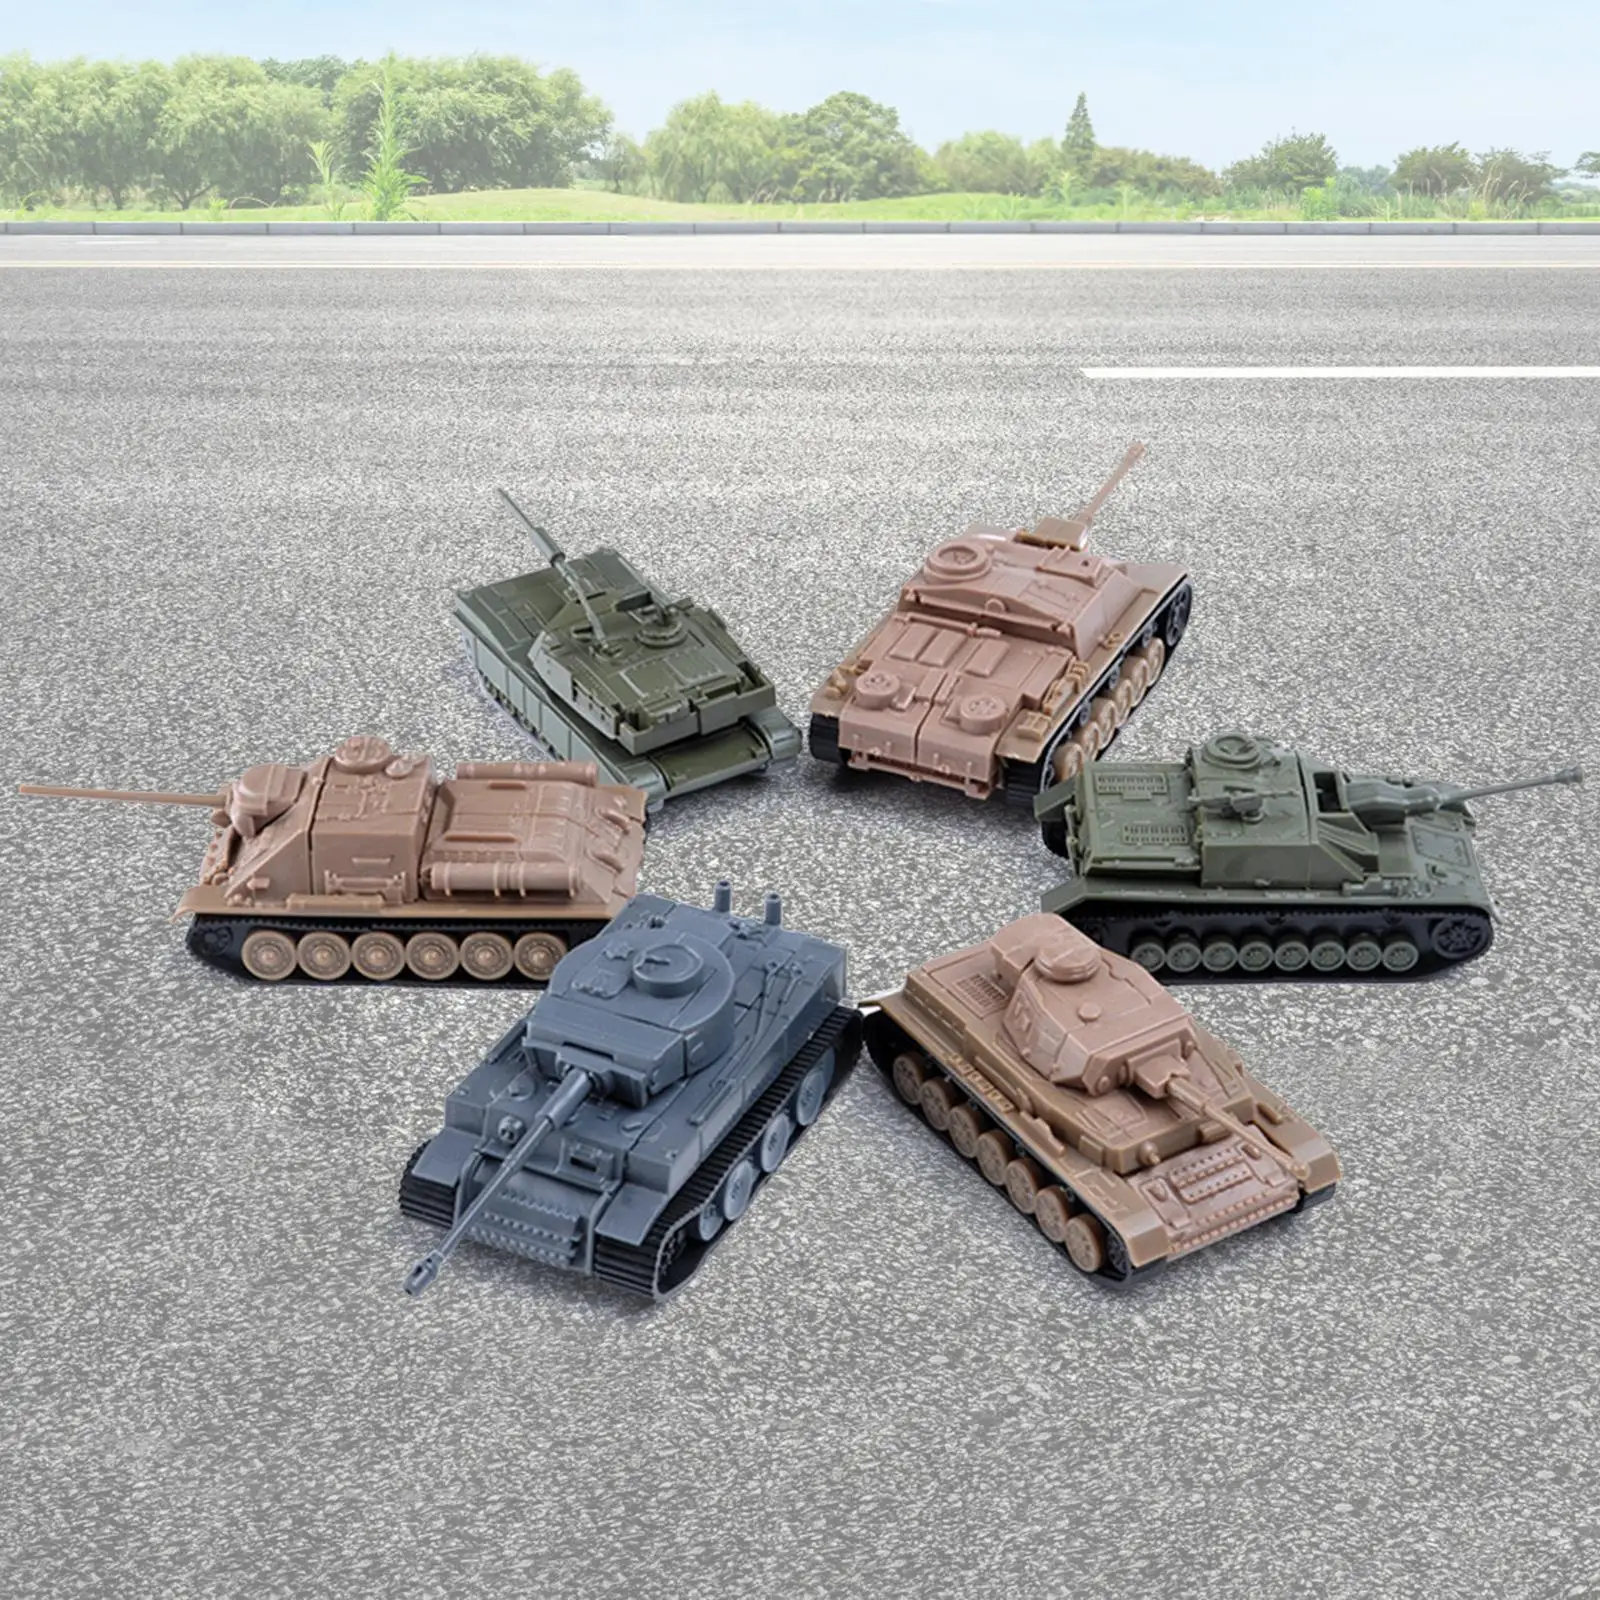 6x Static Tanks Collection Ornaments Toys Party Favors Military Display Gift for Boy and Girl Adult Kids Children Beginners